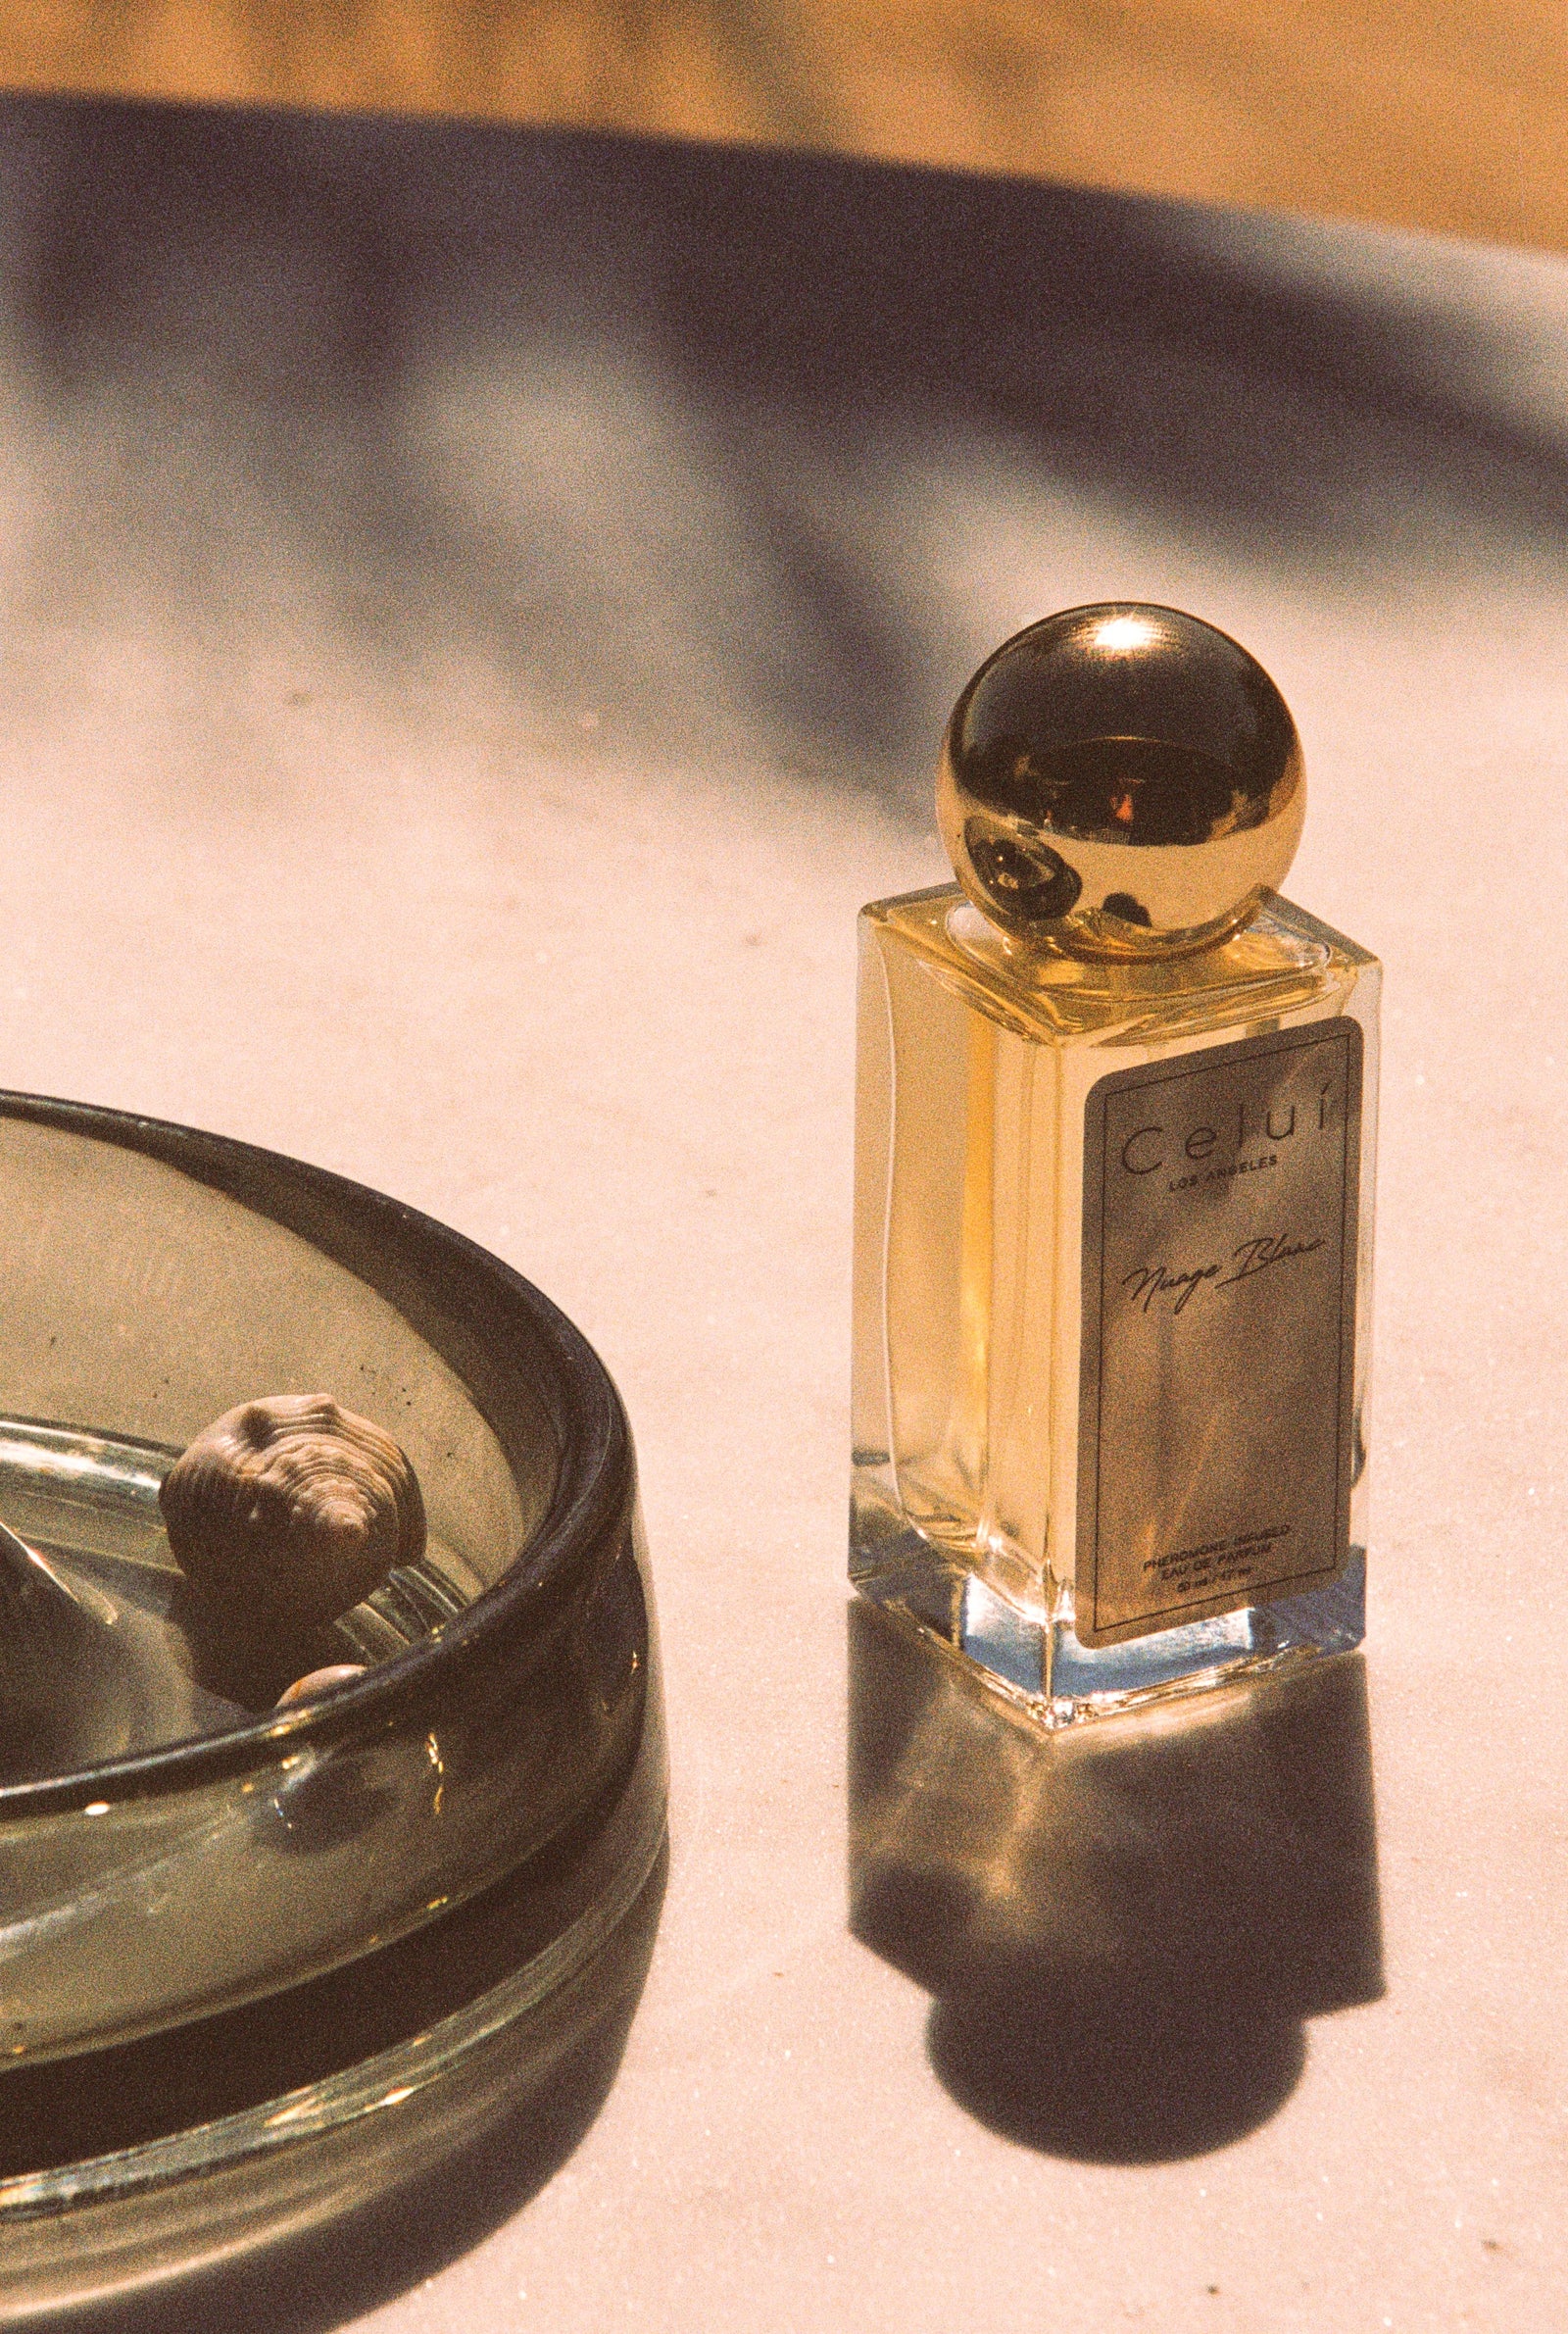 7 Secrets About Your Perfume You Didn't Know